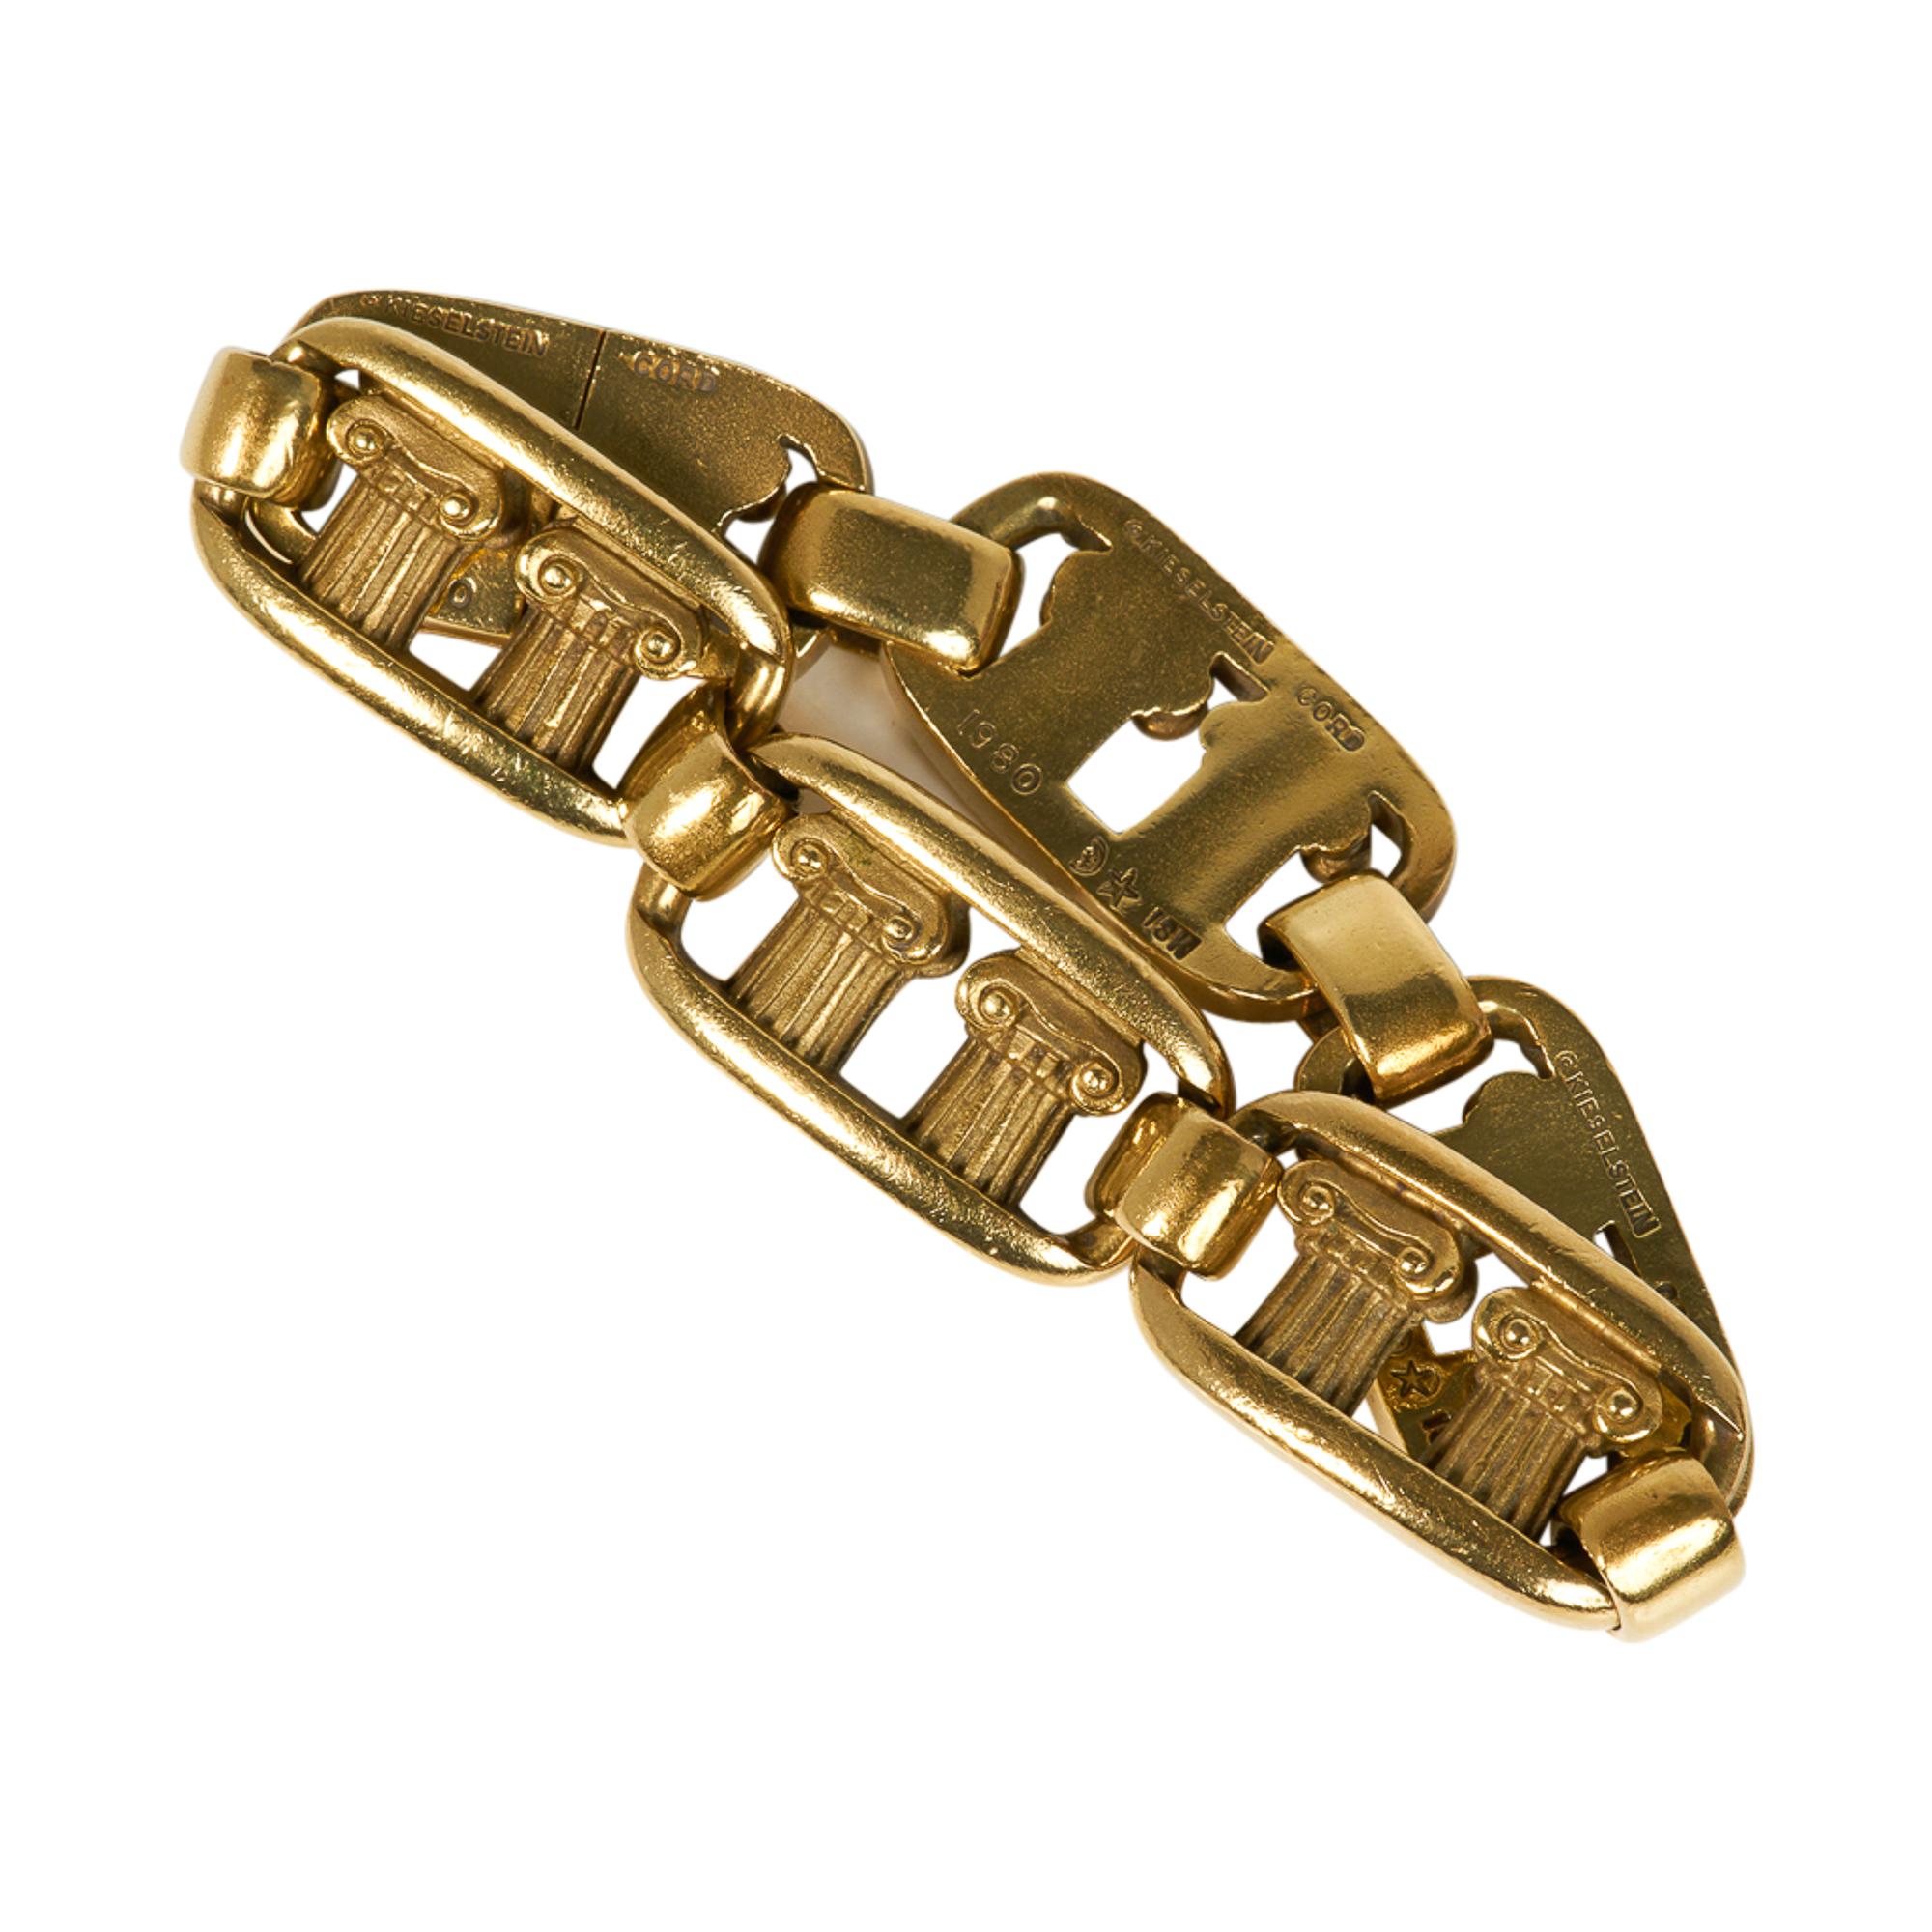 Mightychic offers a striking signature Barry Kieselstein-Cord 1980 Column solid gold 18K gold vintage bracelet.
This highly collectible bracelet has a Greek column design of links with the columns inside.
Created in his signature green gold with a